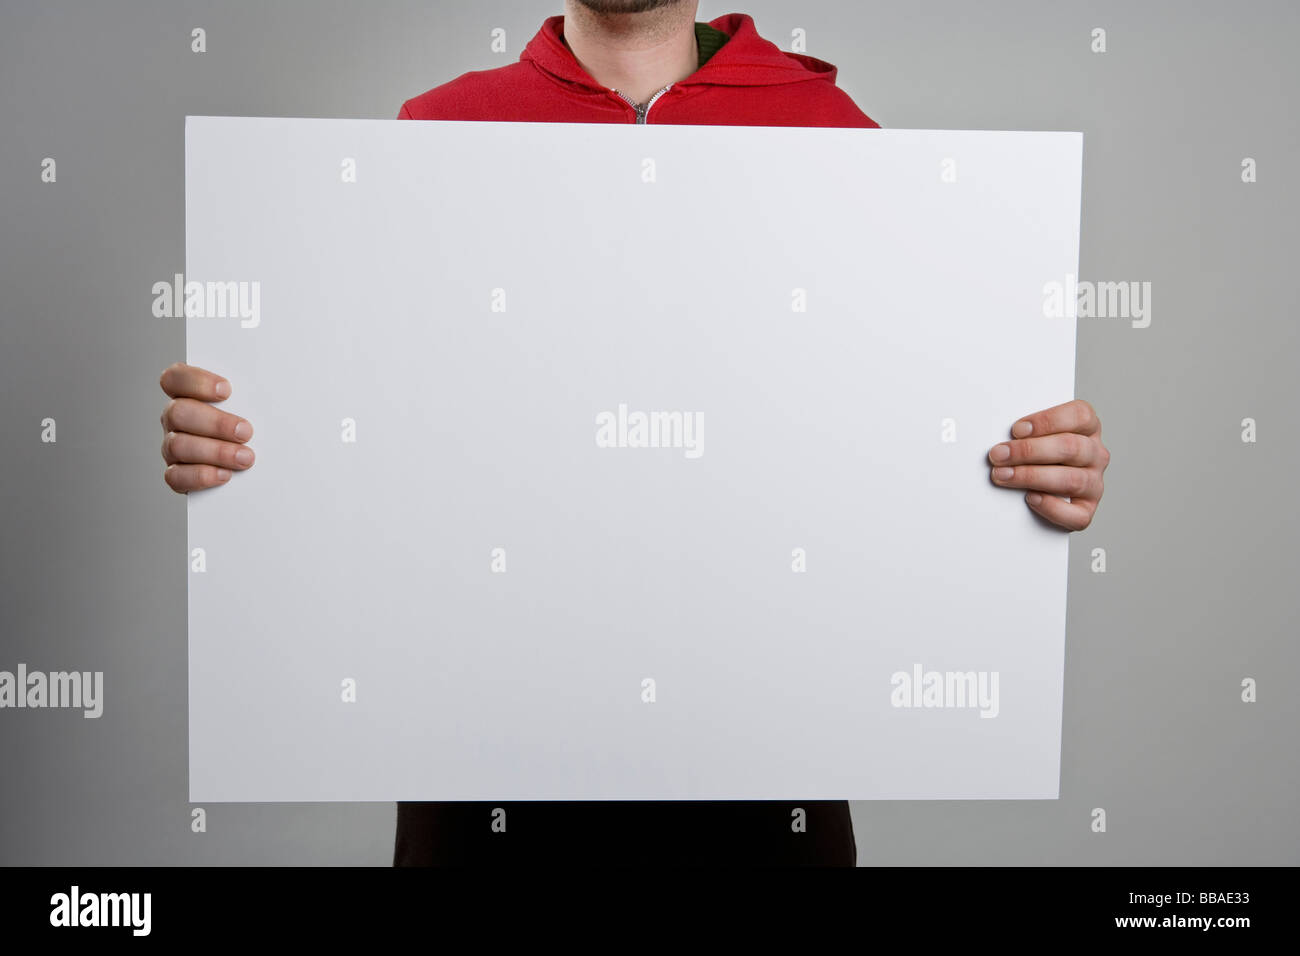 A man holding a blank sign Stock Photo